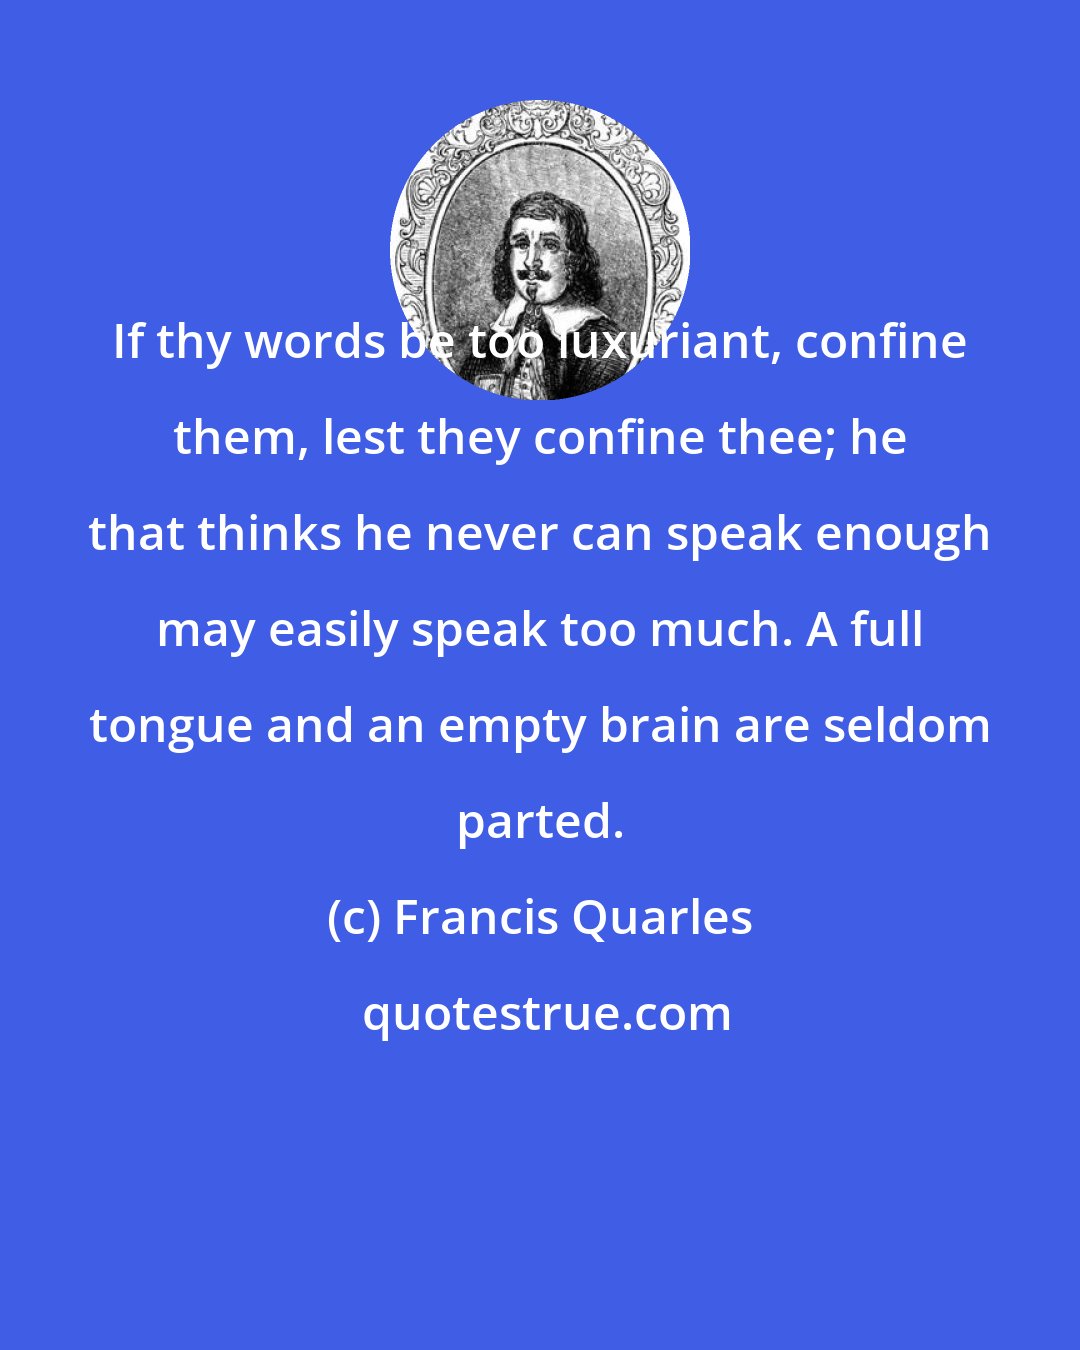 Francis Quarles: If thy words be too luxuriant, confine them, lest they confine thee; he that thinks he never can speak enough may easily speak too much. A full tongue and an empty brain are seldom parted.